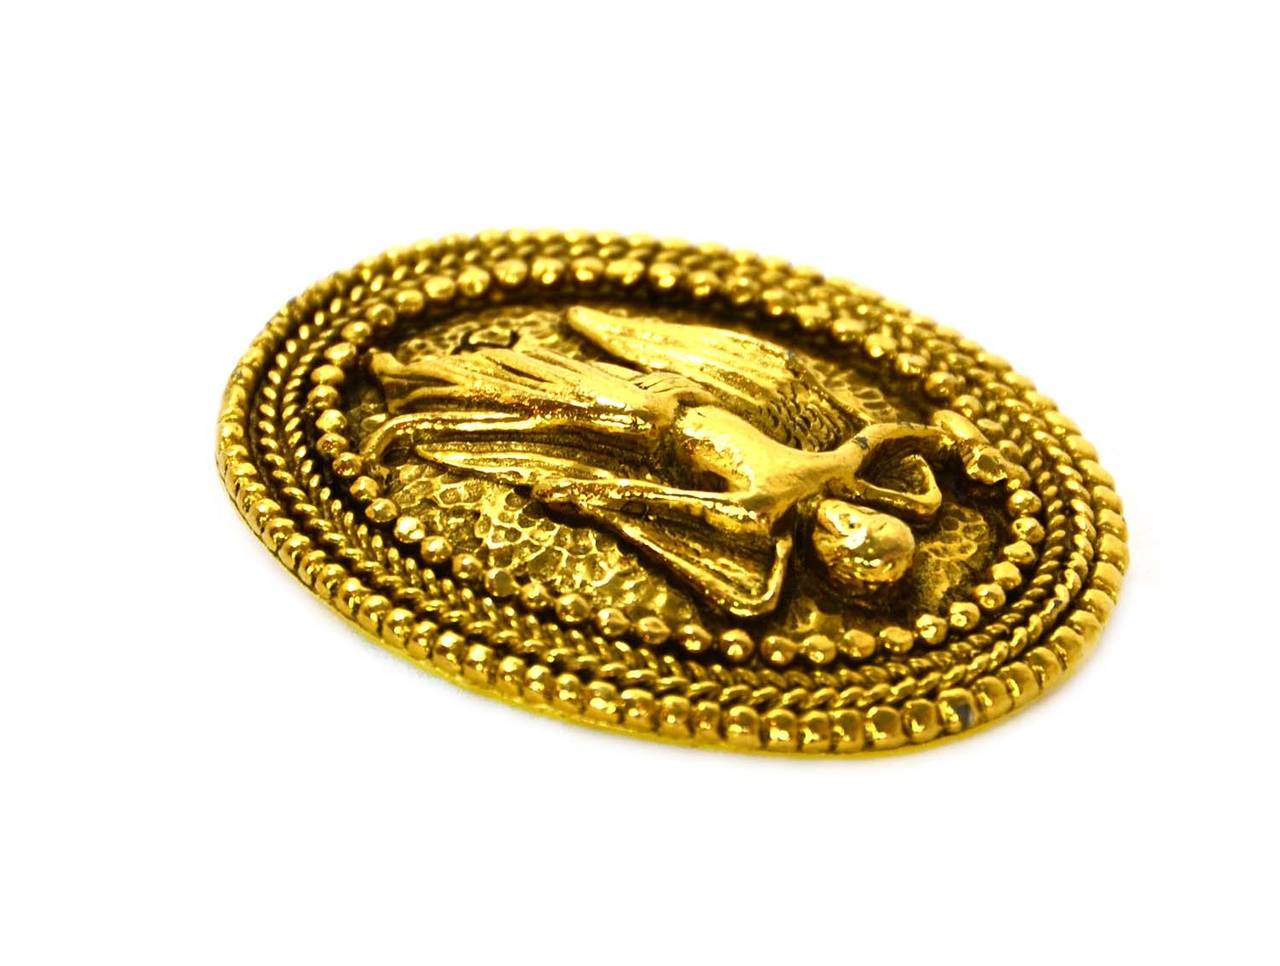 Chanel Vintage Gold Angel Brooch
Features intricate detailing framing angel

    Made in: France
    Year of Production: 1990-1992
    Stamp: CHANEL CC MADE IN FRANCE
    Closure: Pin back closure
    Color: Goldtone
    Materials: Metal
  